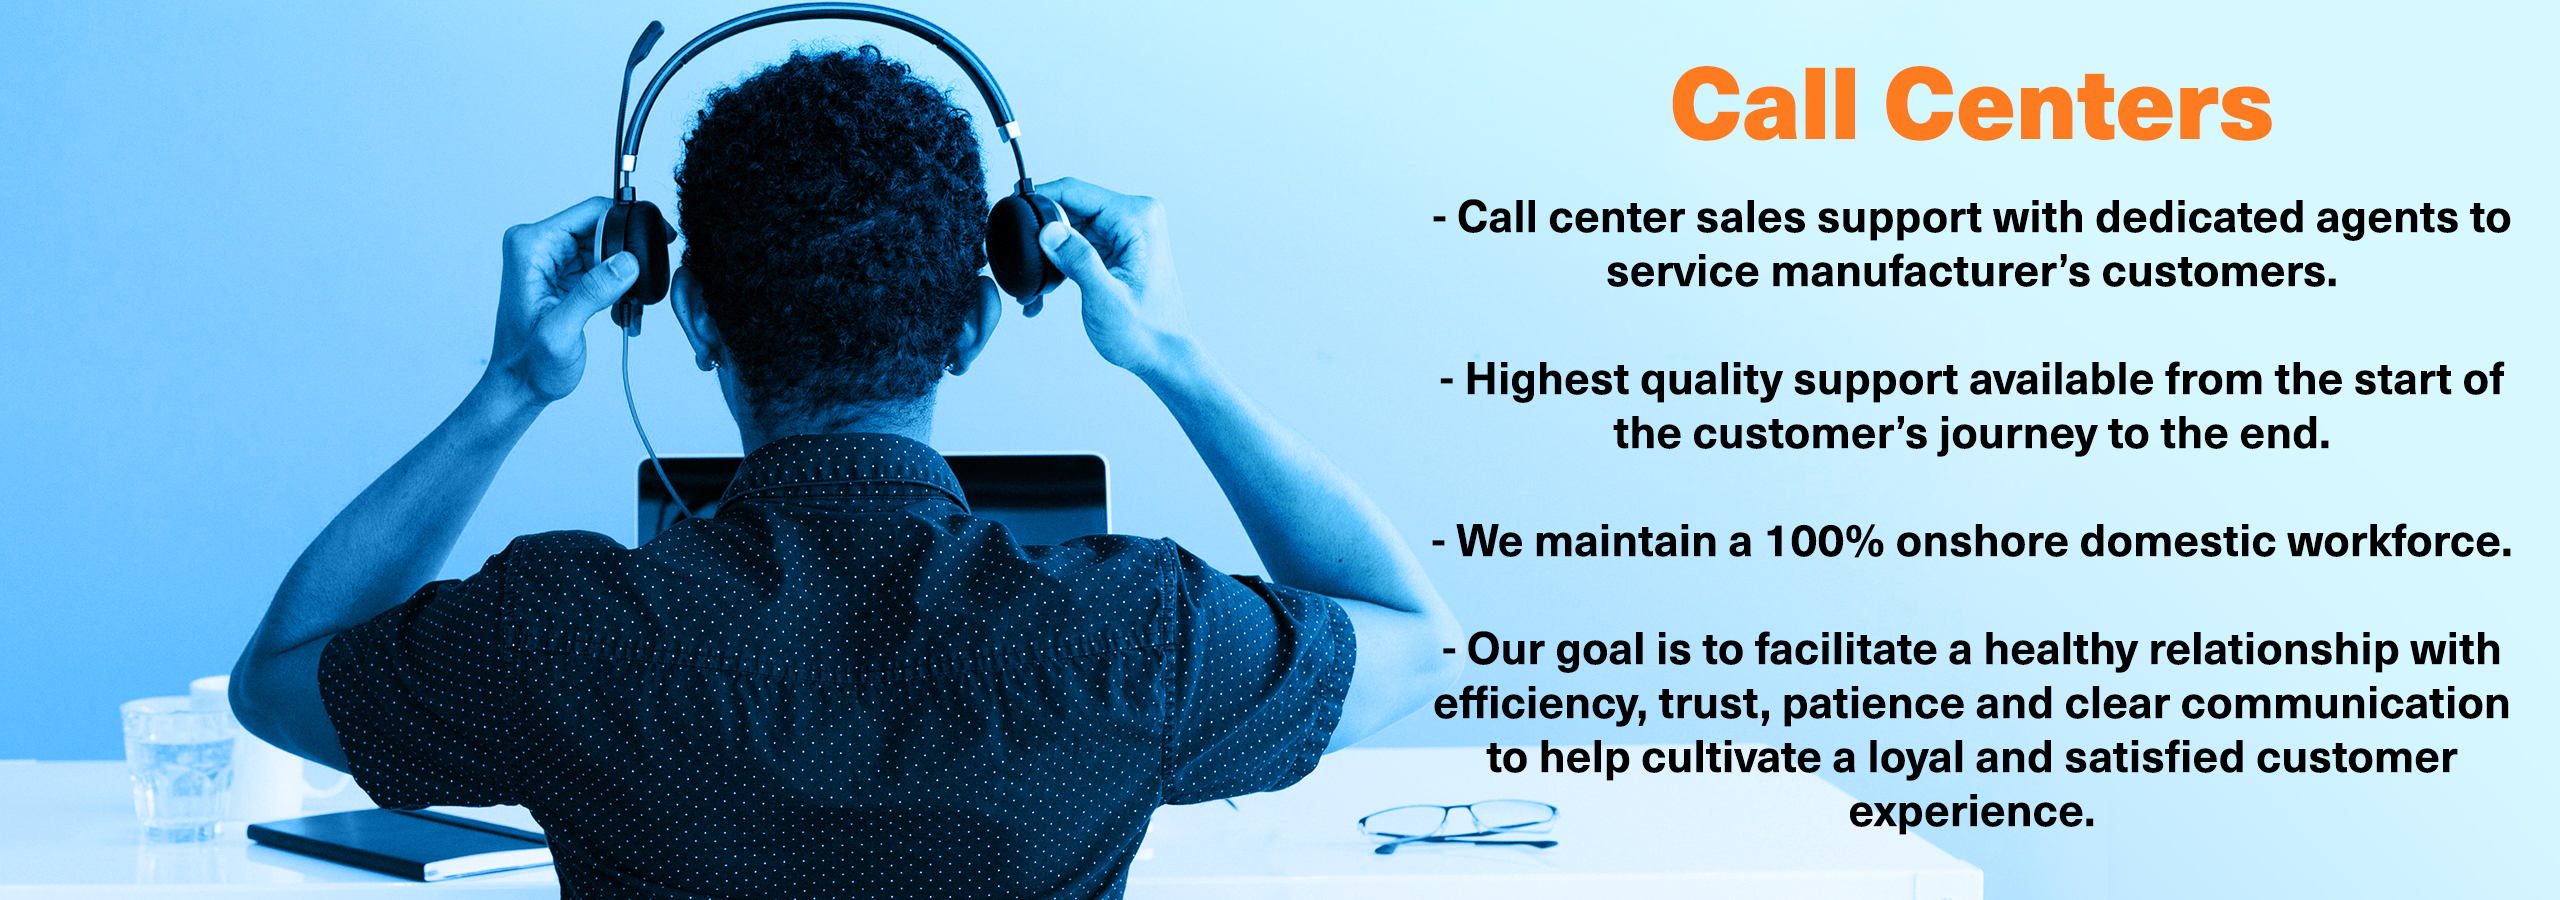 We provide high-quality call center sales support with dedicated agents to service all of your customers.